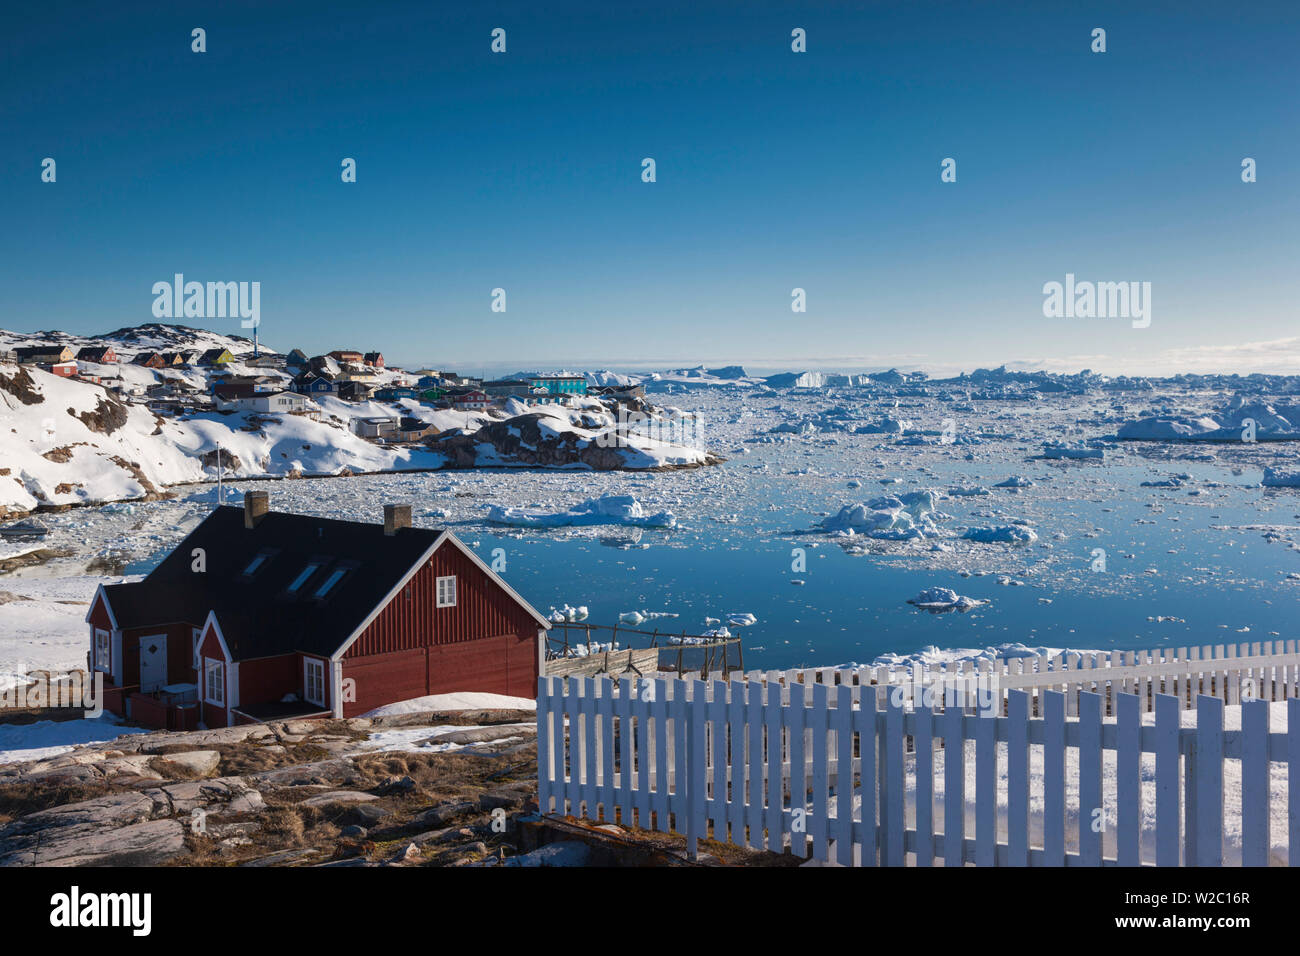 Greenland, Disko Bay, Ilulissat, elevated town view with floating ice Stock Photo